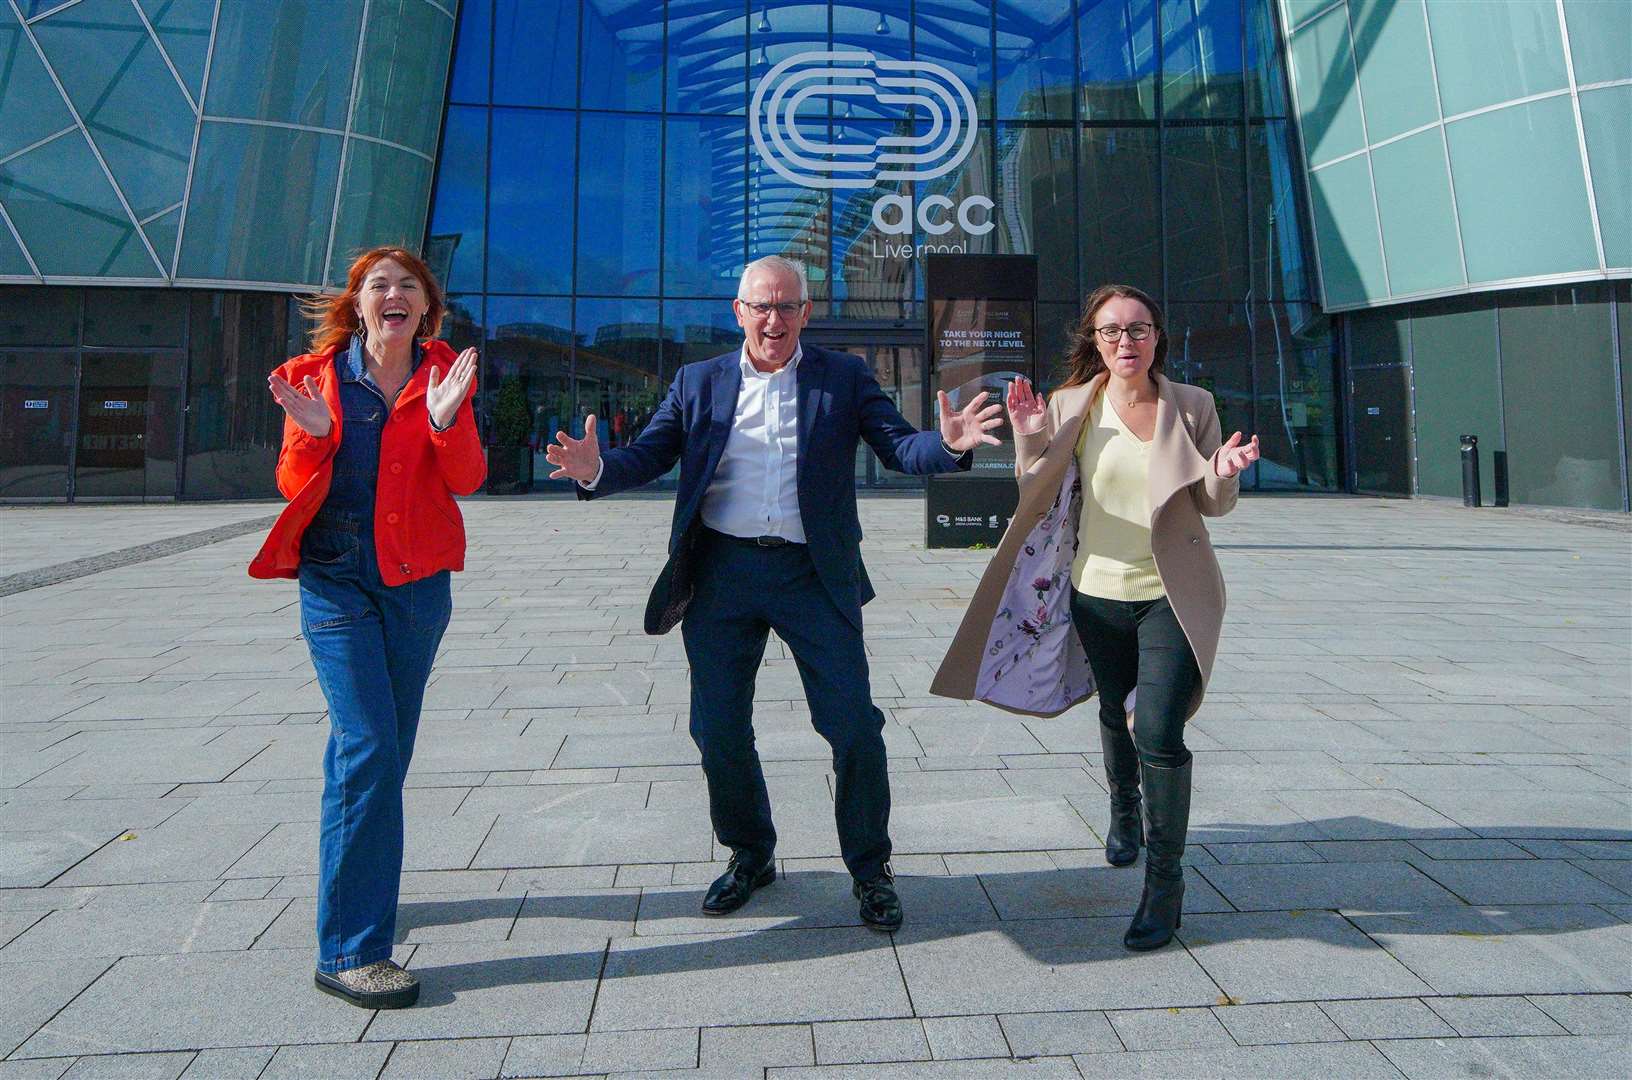 Claire McColgan, director of Culture Liverpool, Bill Addy, chief executive at the Liverpool Bid Company, and Faye Dyer, managing director of the ACC Group, outside Liverpool M&S Arena after the city was announced as host of 2023 Eurovision Song Contest (Peter Byrne/PA)